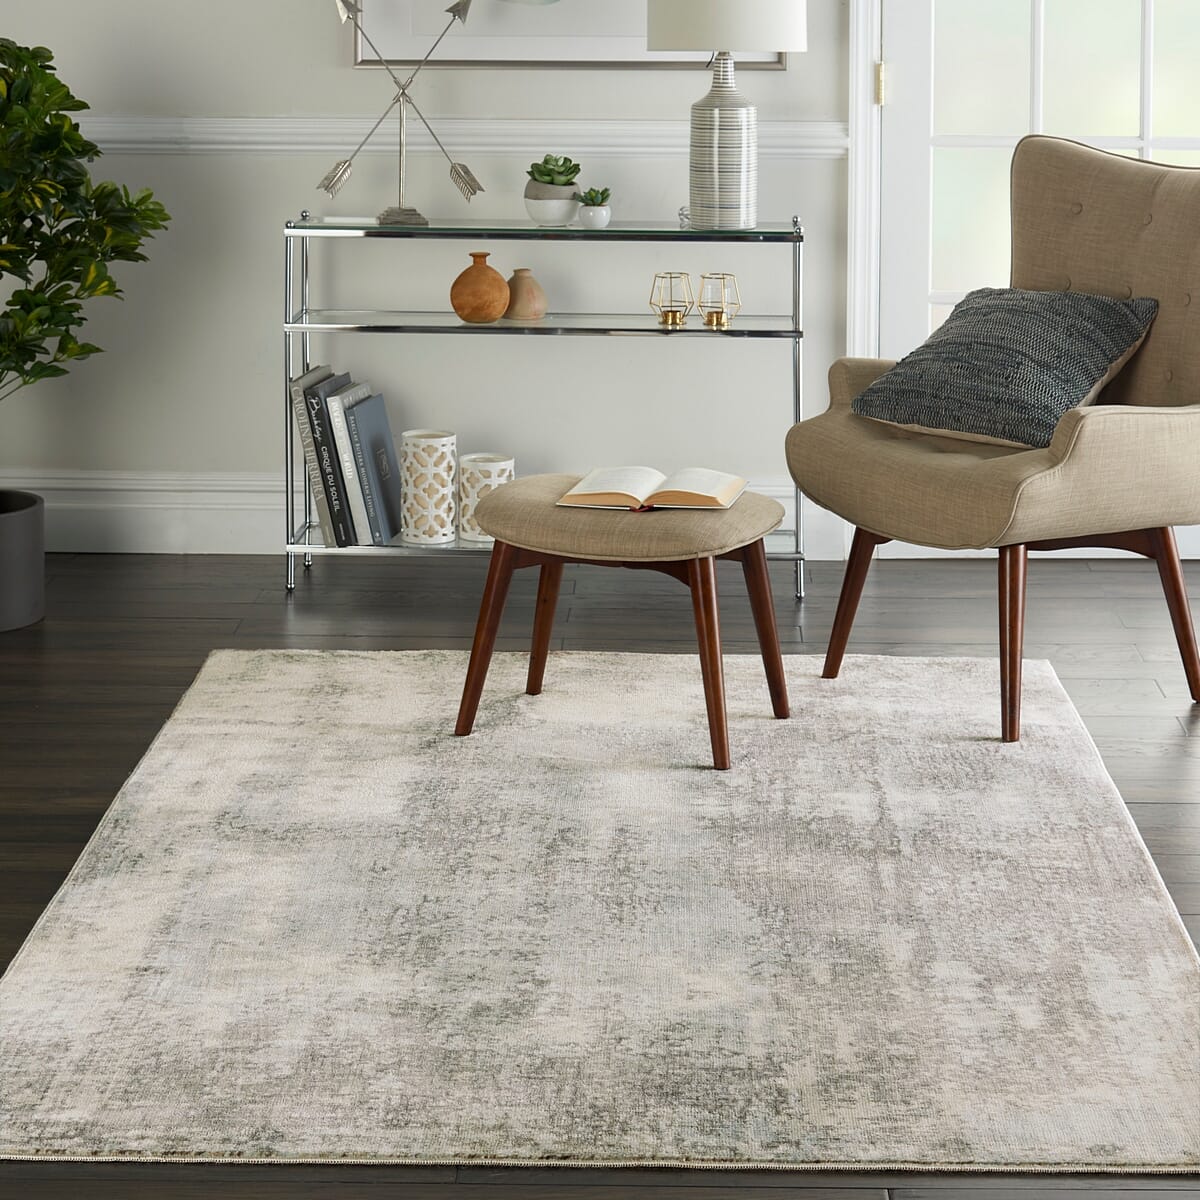 Nourison Etchings Etc02 Grey / Light Blue Organic / Abstract Area Rug